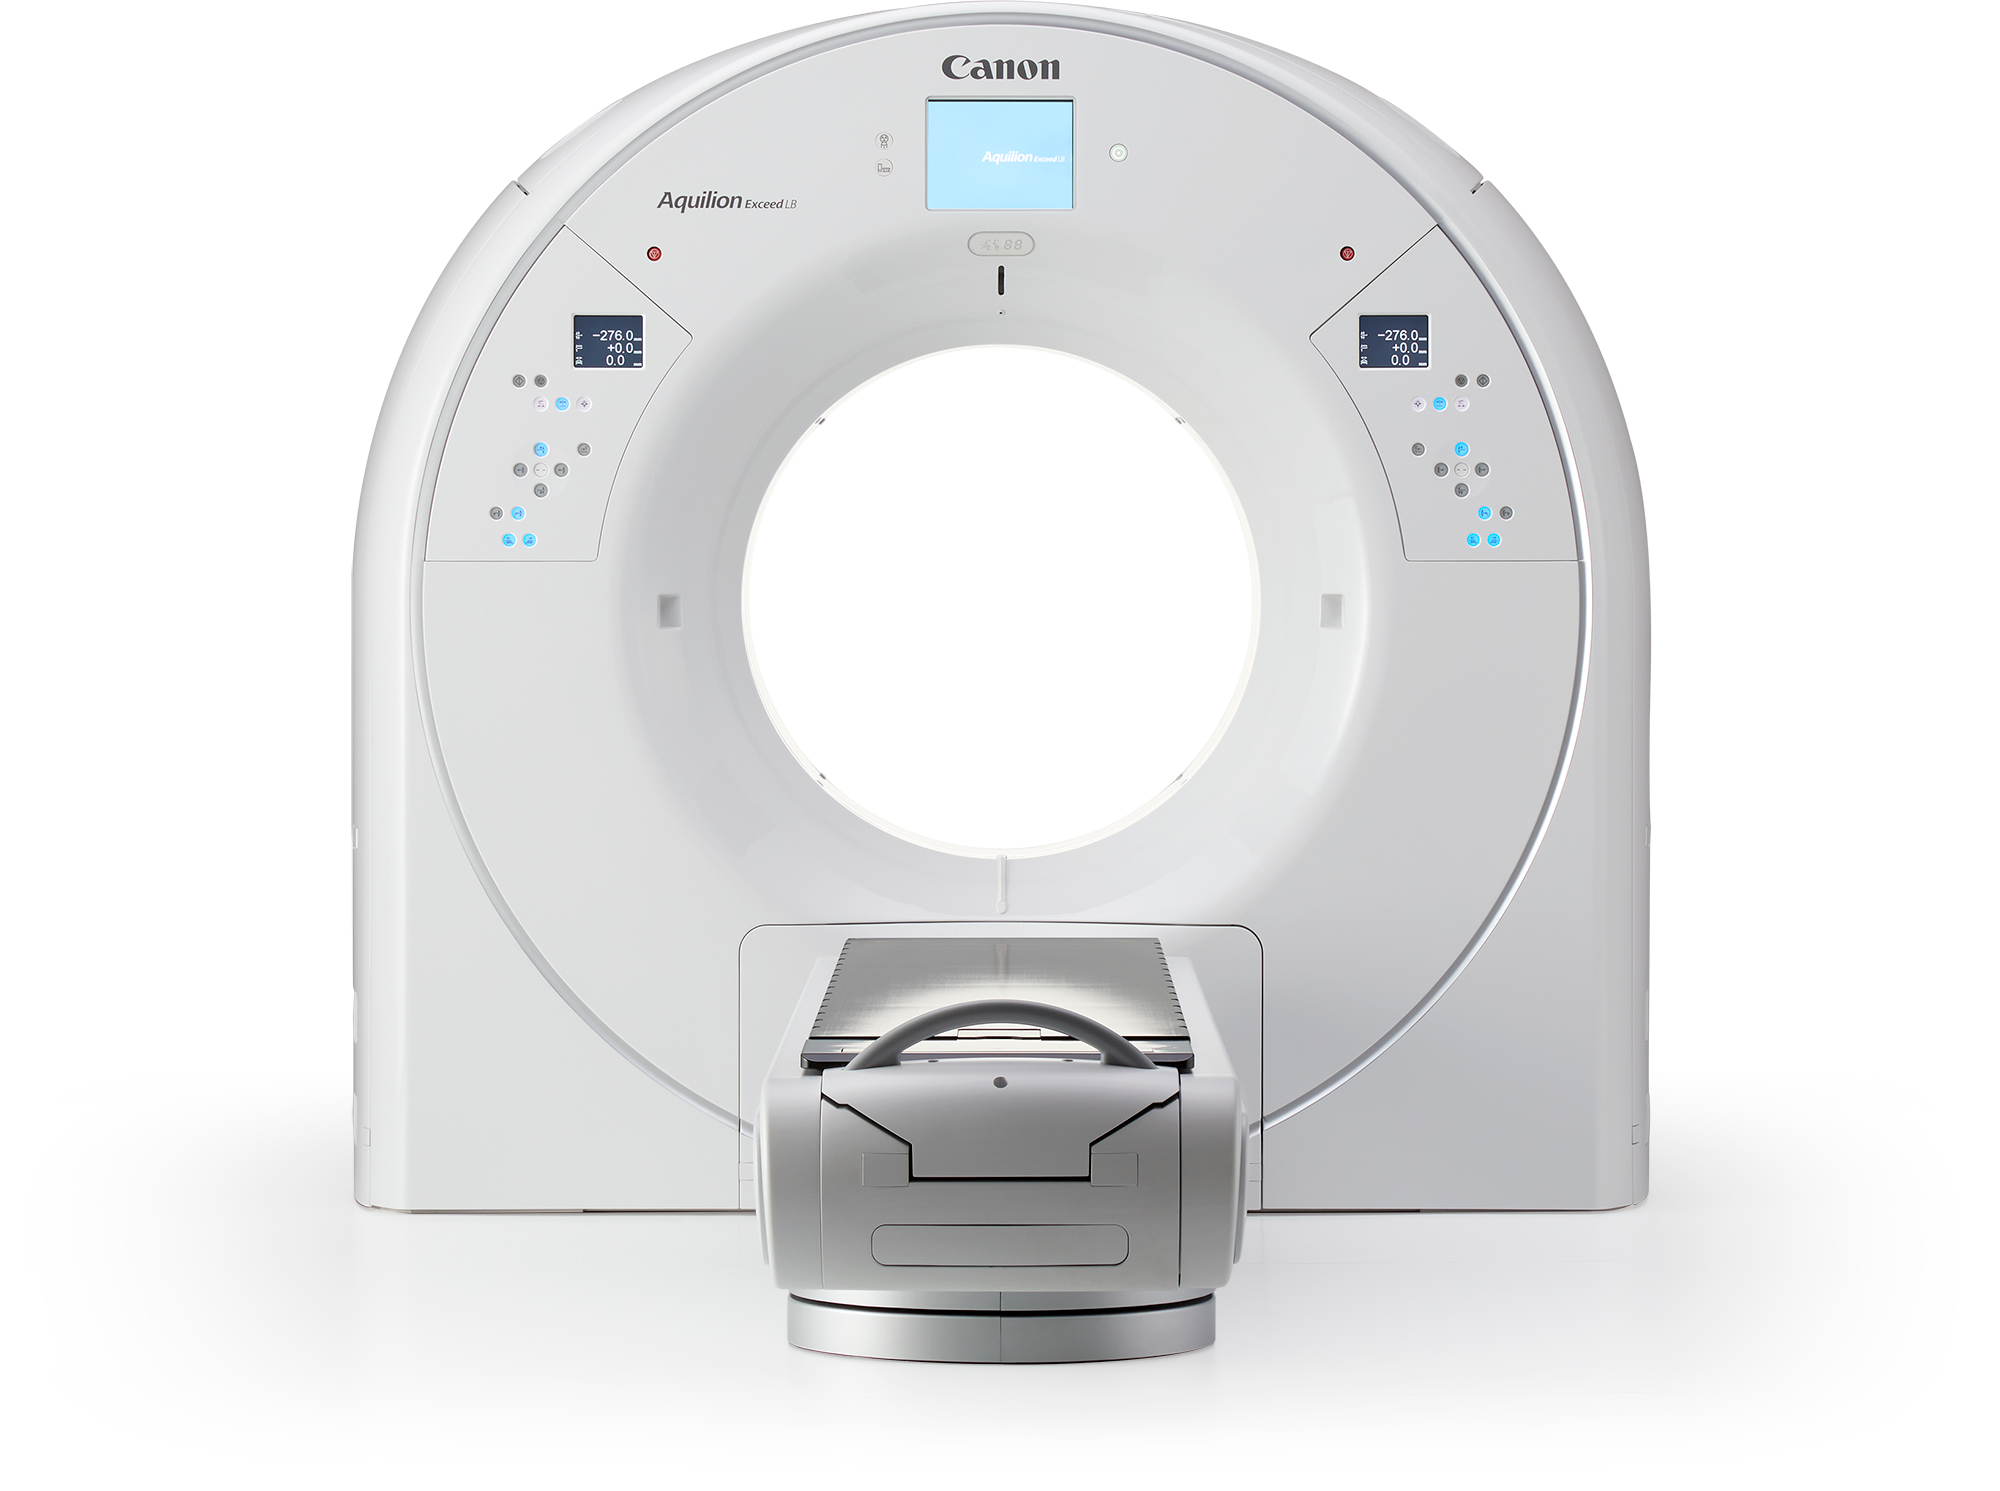 Aquilion Exceed CT Scanner